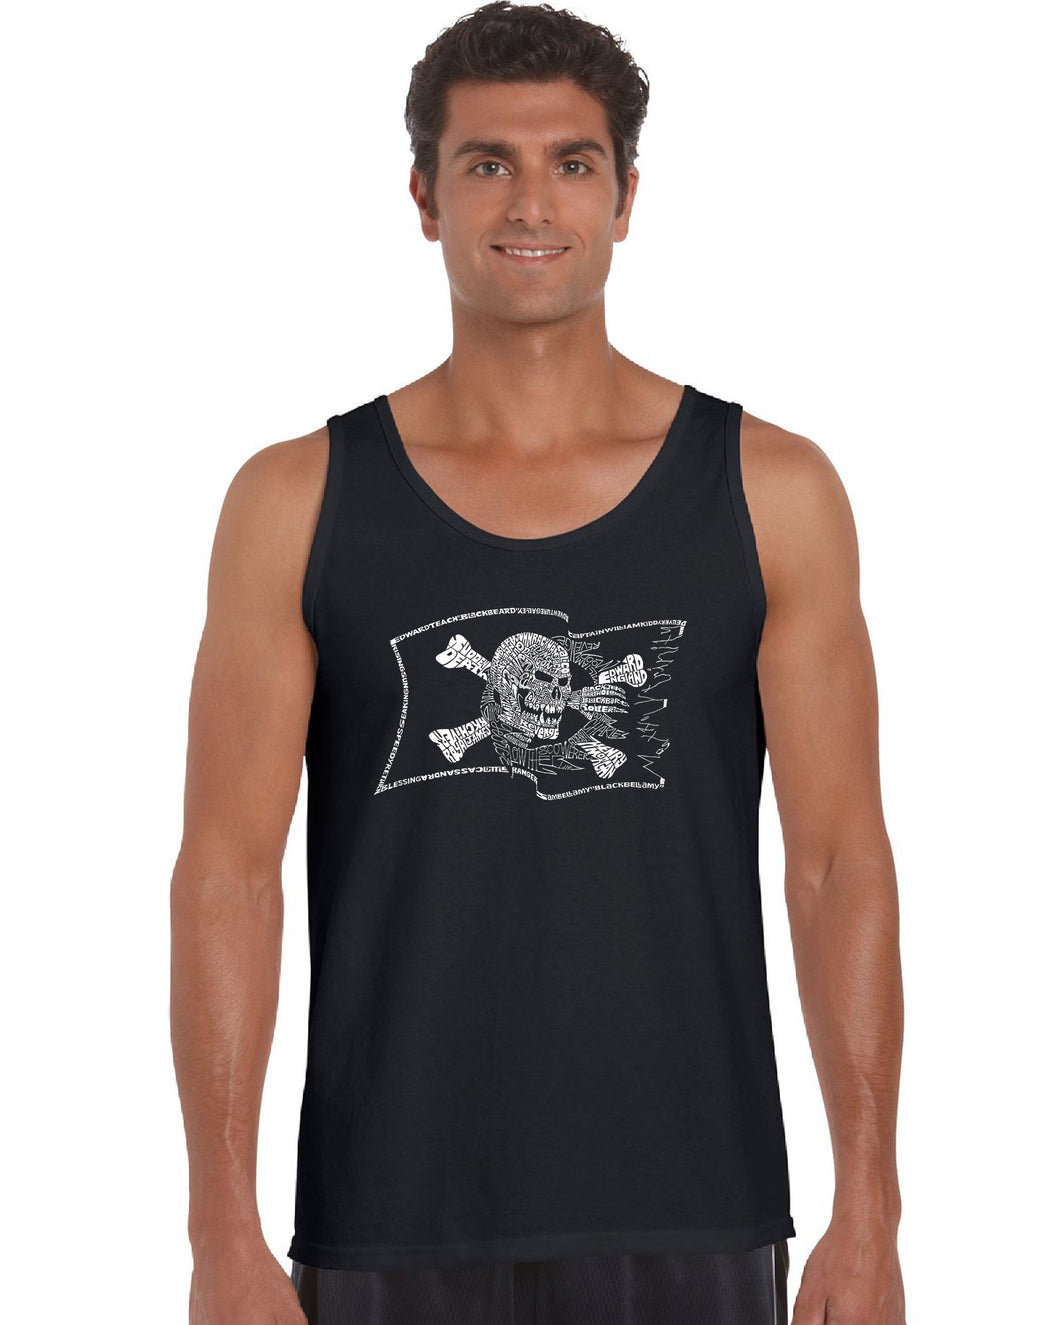 FAMOUS PIRATE CAPTAINS AND SHIPS - Men's Word Art Tank Top